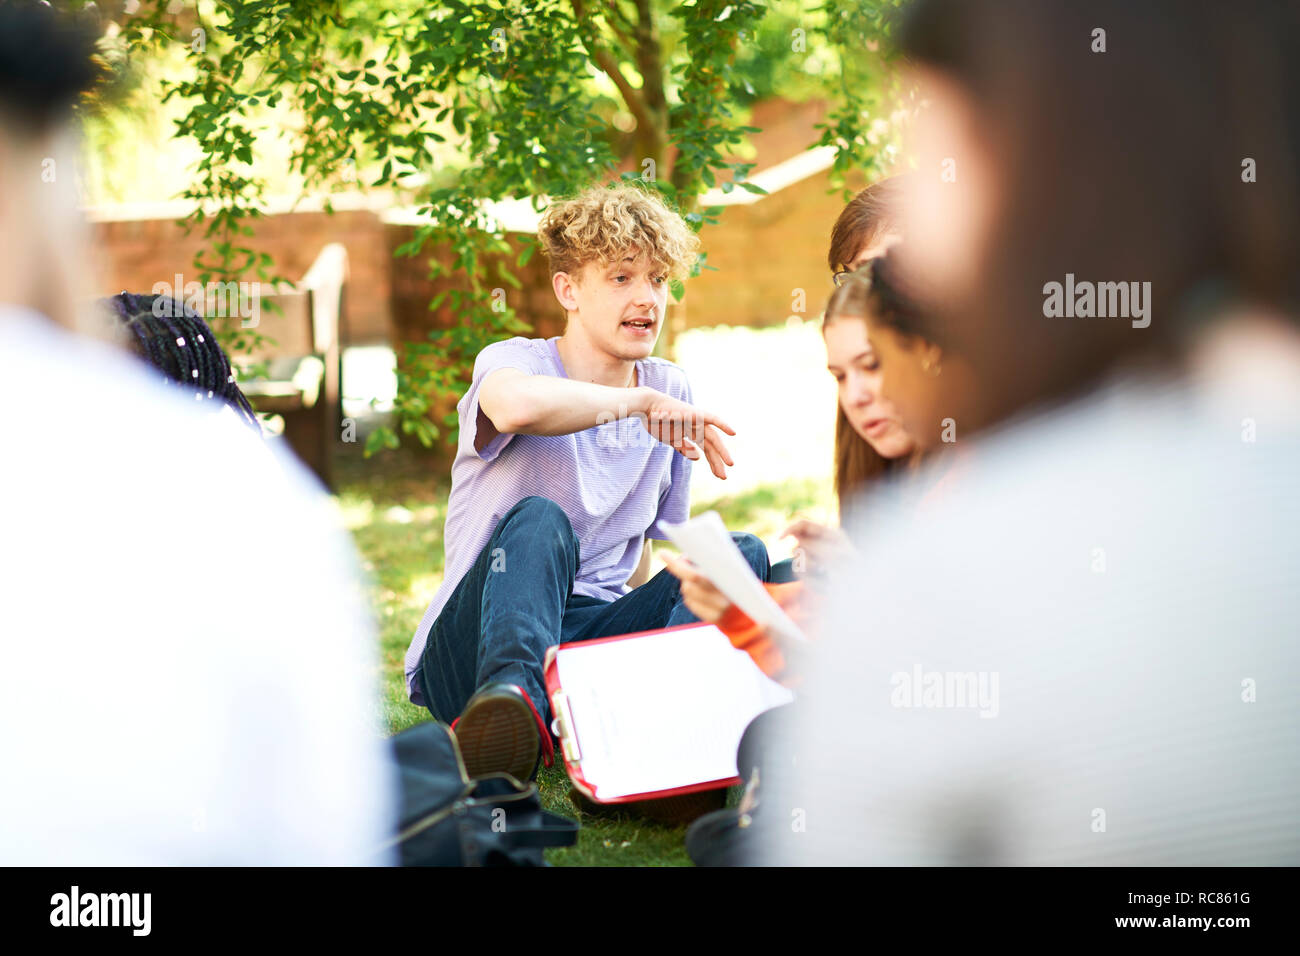 Male and female higher education students discussing paperwork on college campus lawn, over shoulder view Stock Photo